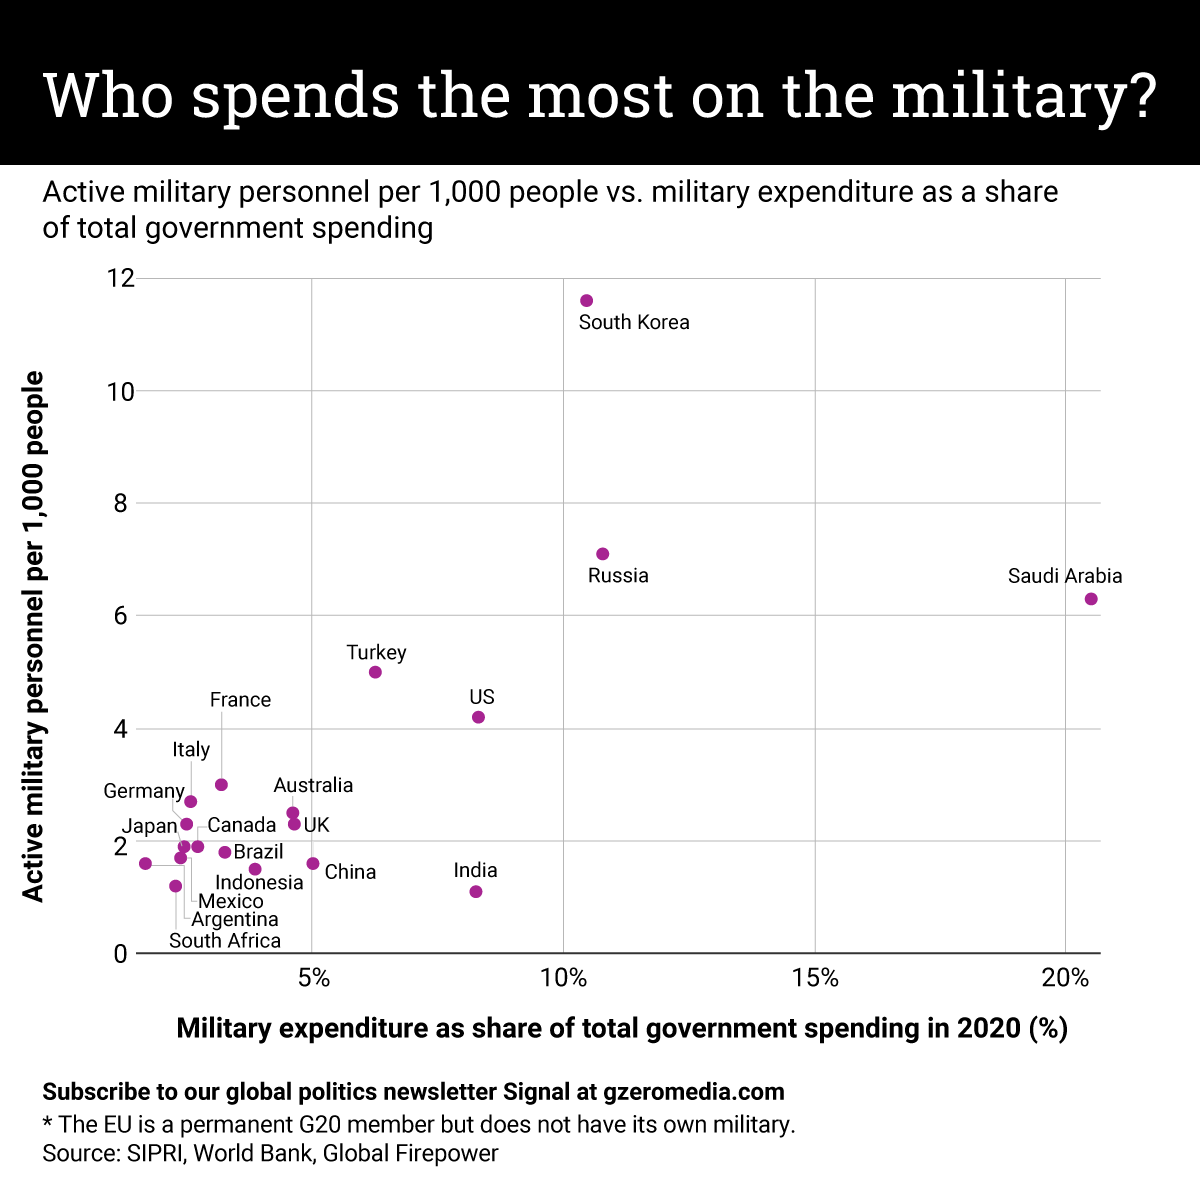 Who spends the most on the military?